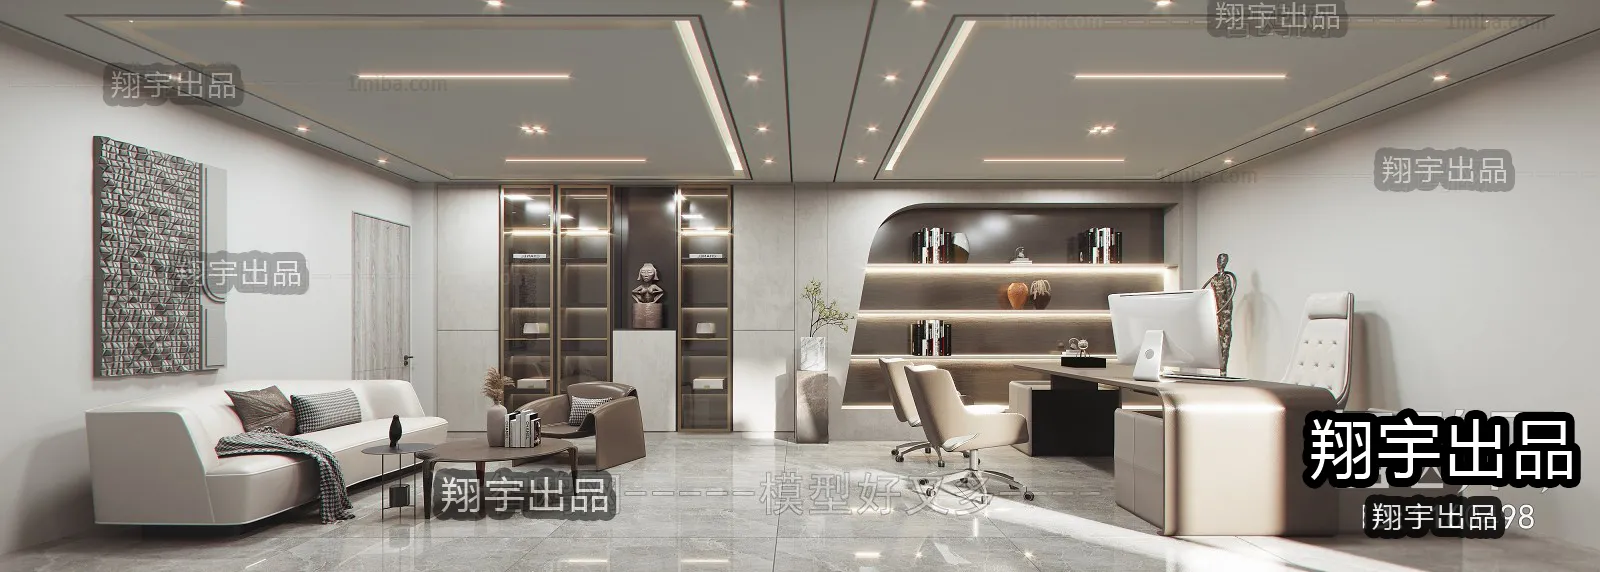 3D OFFICE INTERIOR (VRAY) – MANAGER ROOM 3D SCENES – 113